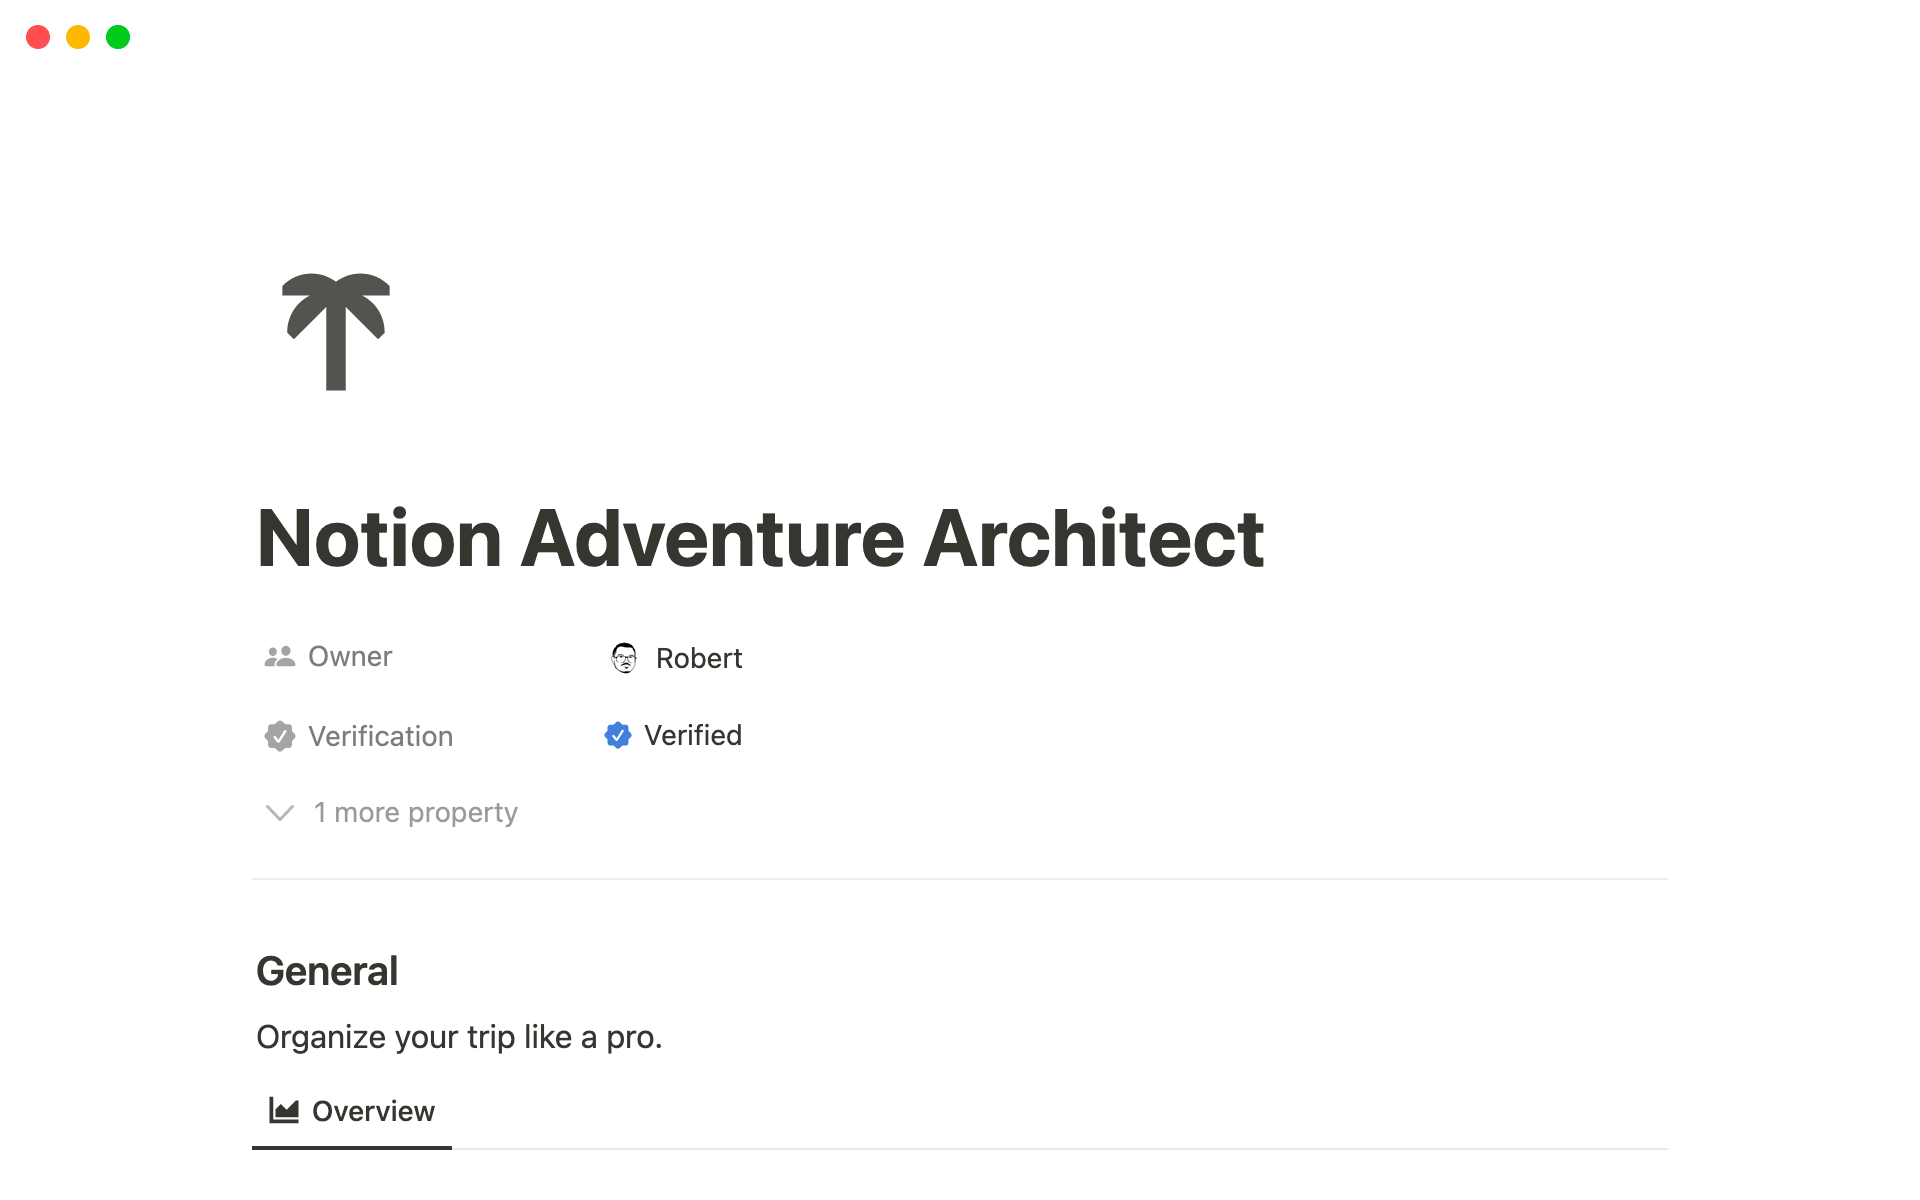 The Notion Adventure Architect template is a versatile tool designed to assist individuals in planning and organizing their personal travel adventures.